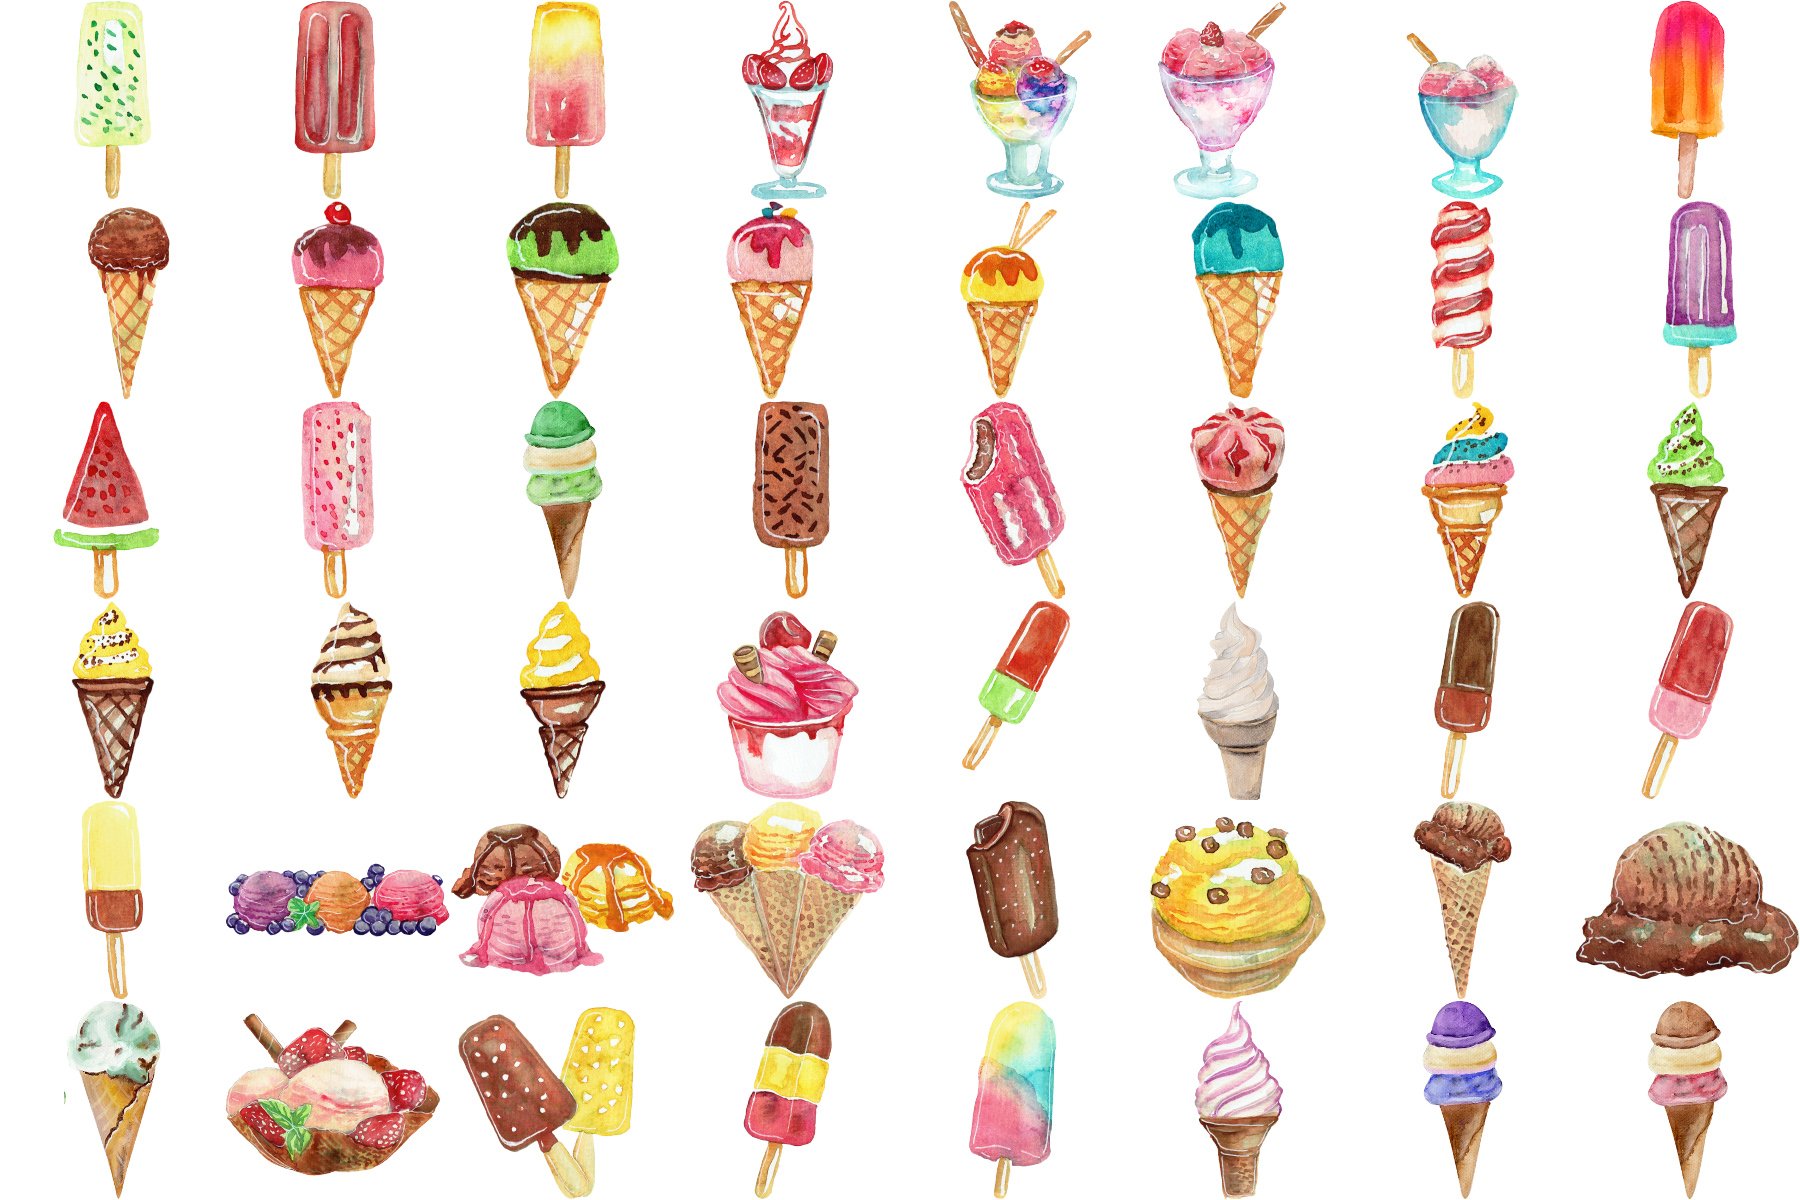 So tasty and colorful ice creams pack.